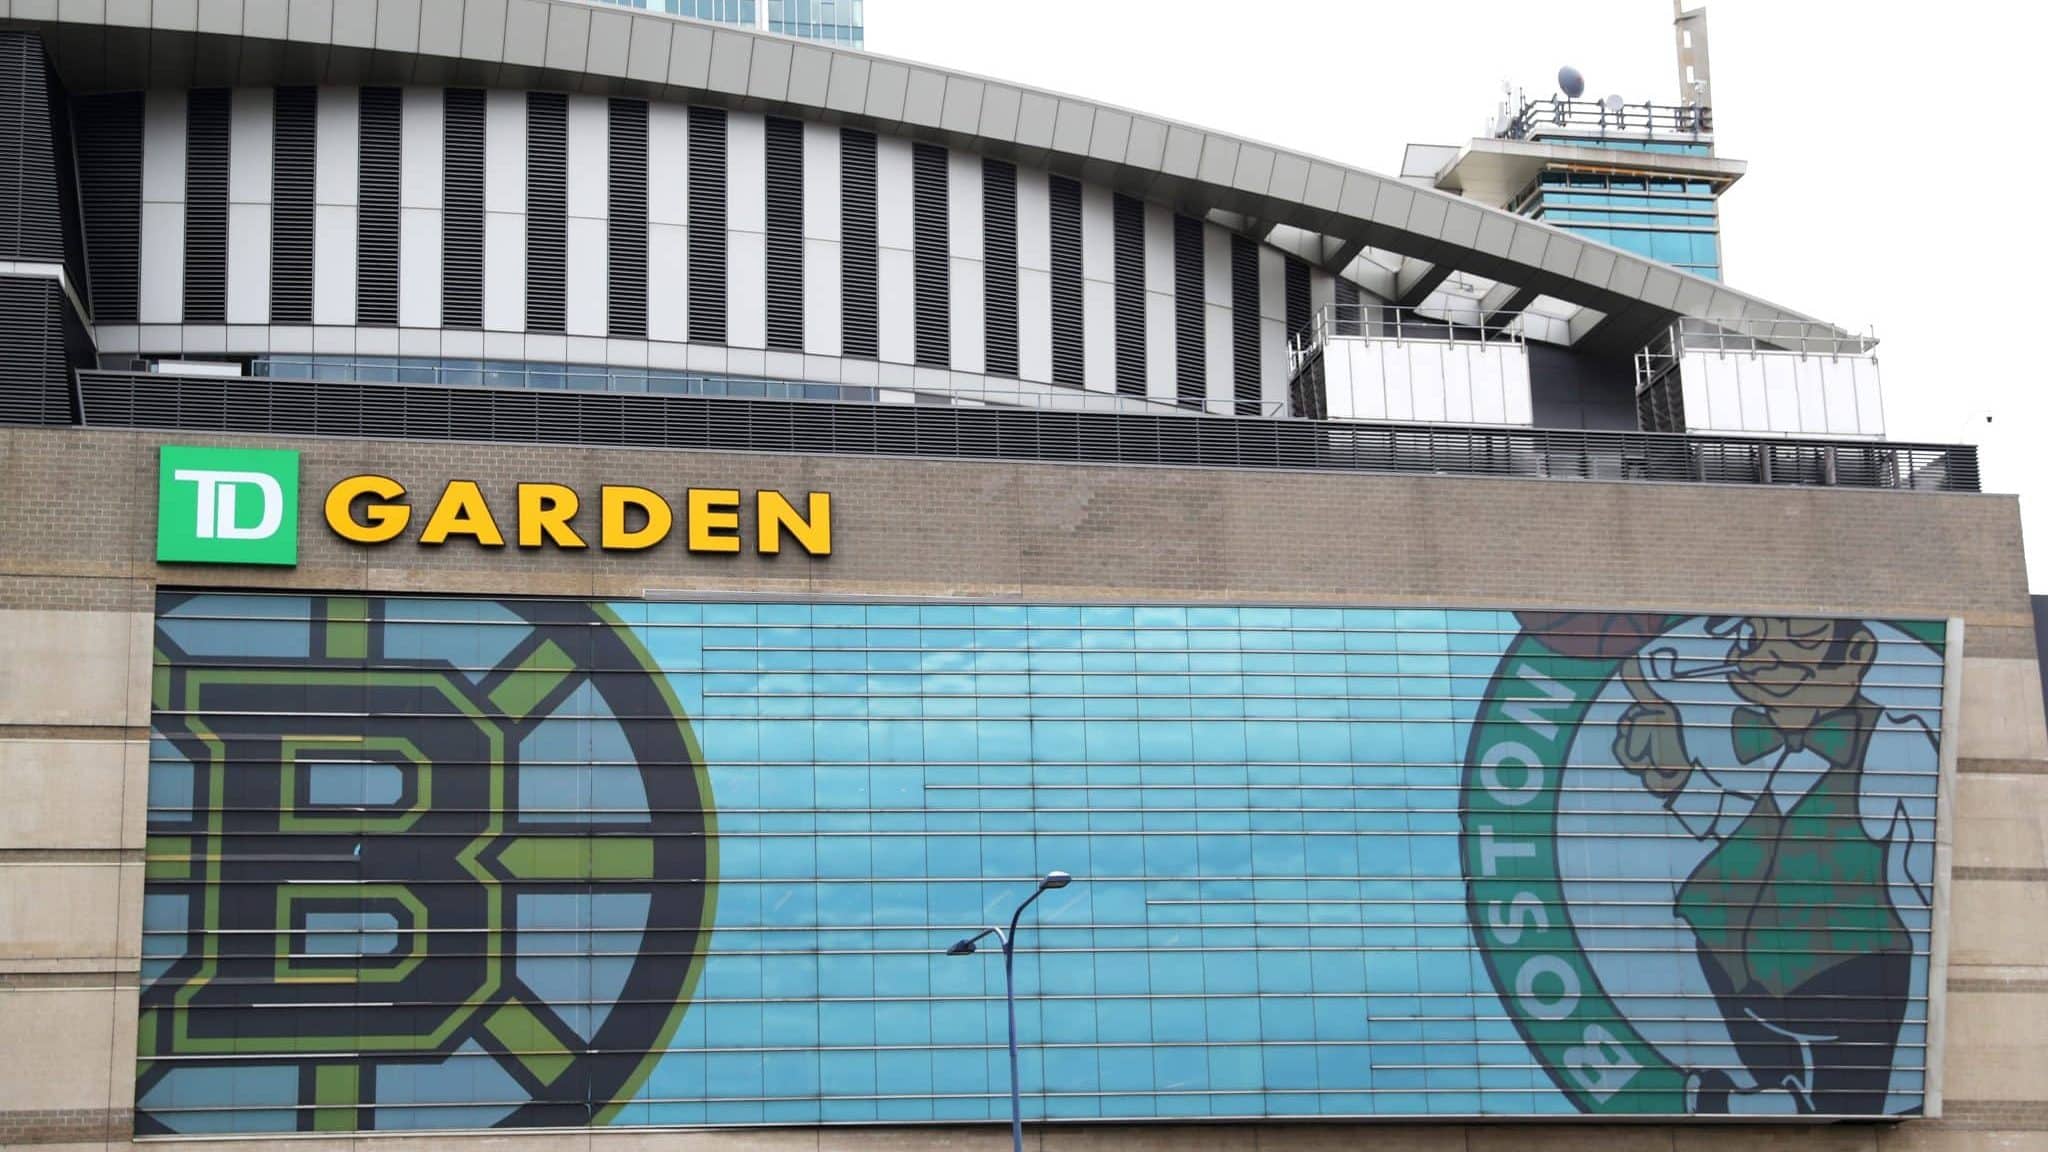 BOSTON, MASSACHUSETTS - MARCH 12: A view outside of TD Garden, the venue that hosts the Boston Bruins and Boston Celtics on March 12, 2020 in Boston, Massachusetts. It has been announced that NBA and NHL seasons have been suspended due to COVID-19 with hopes of returning later in the spring. The NBA, NHL, NCAA and MLB have all announced cancellations or postponements of events because of the virus.